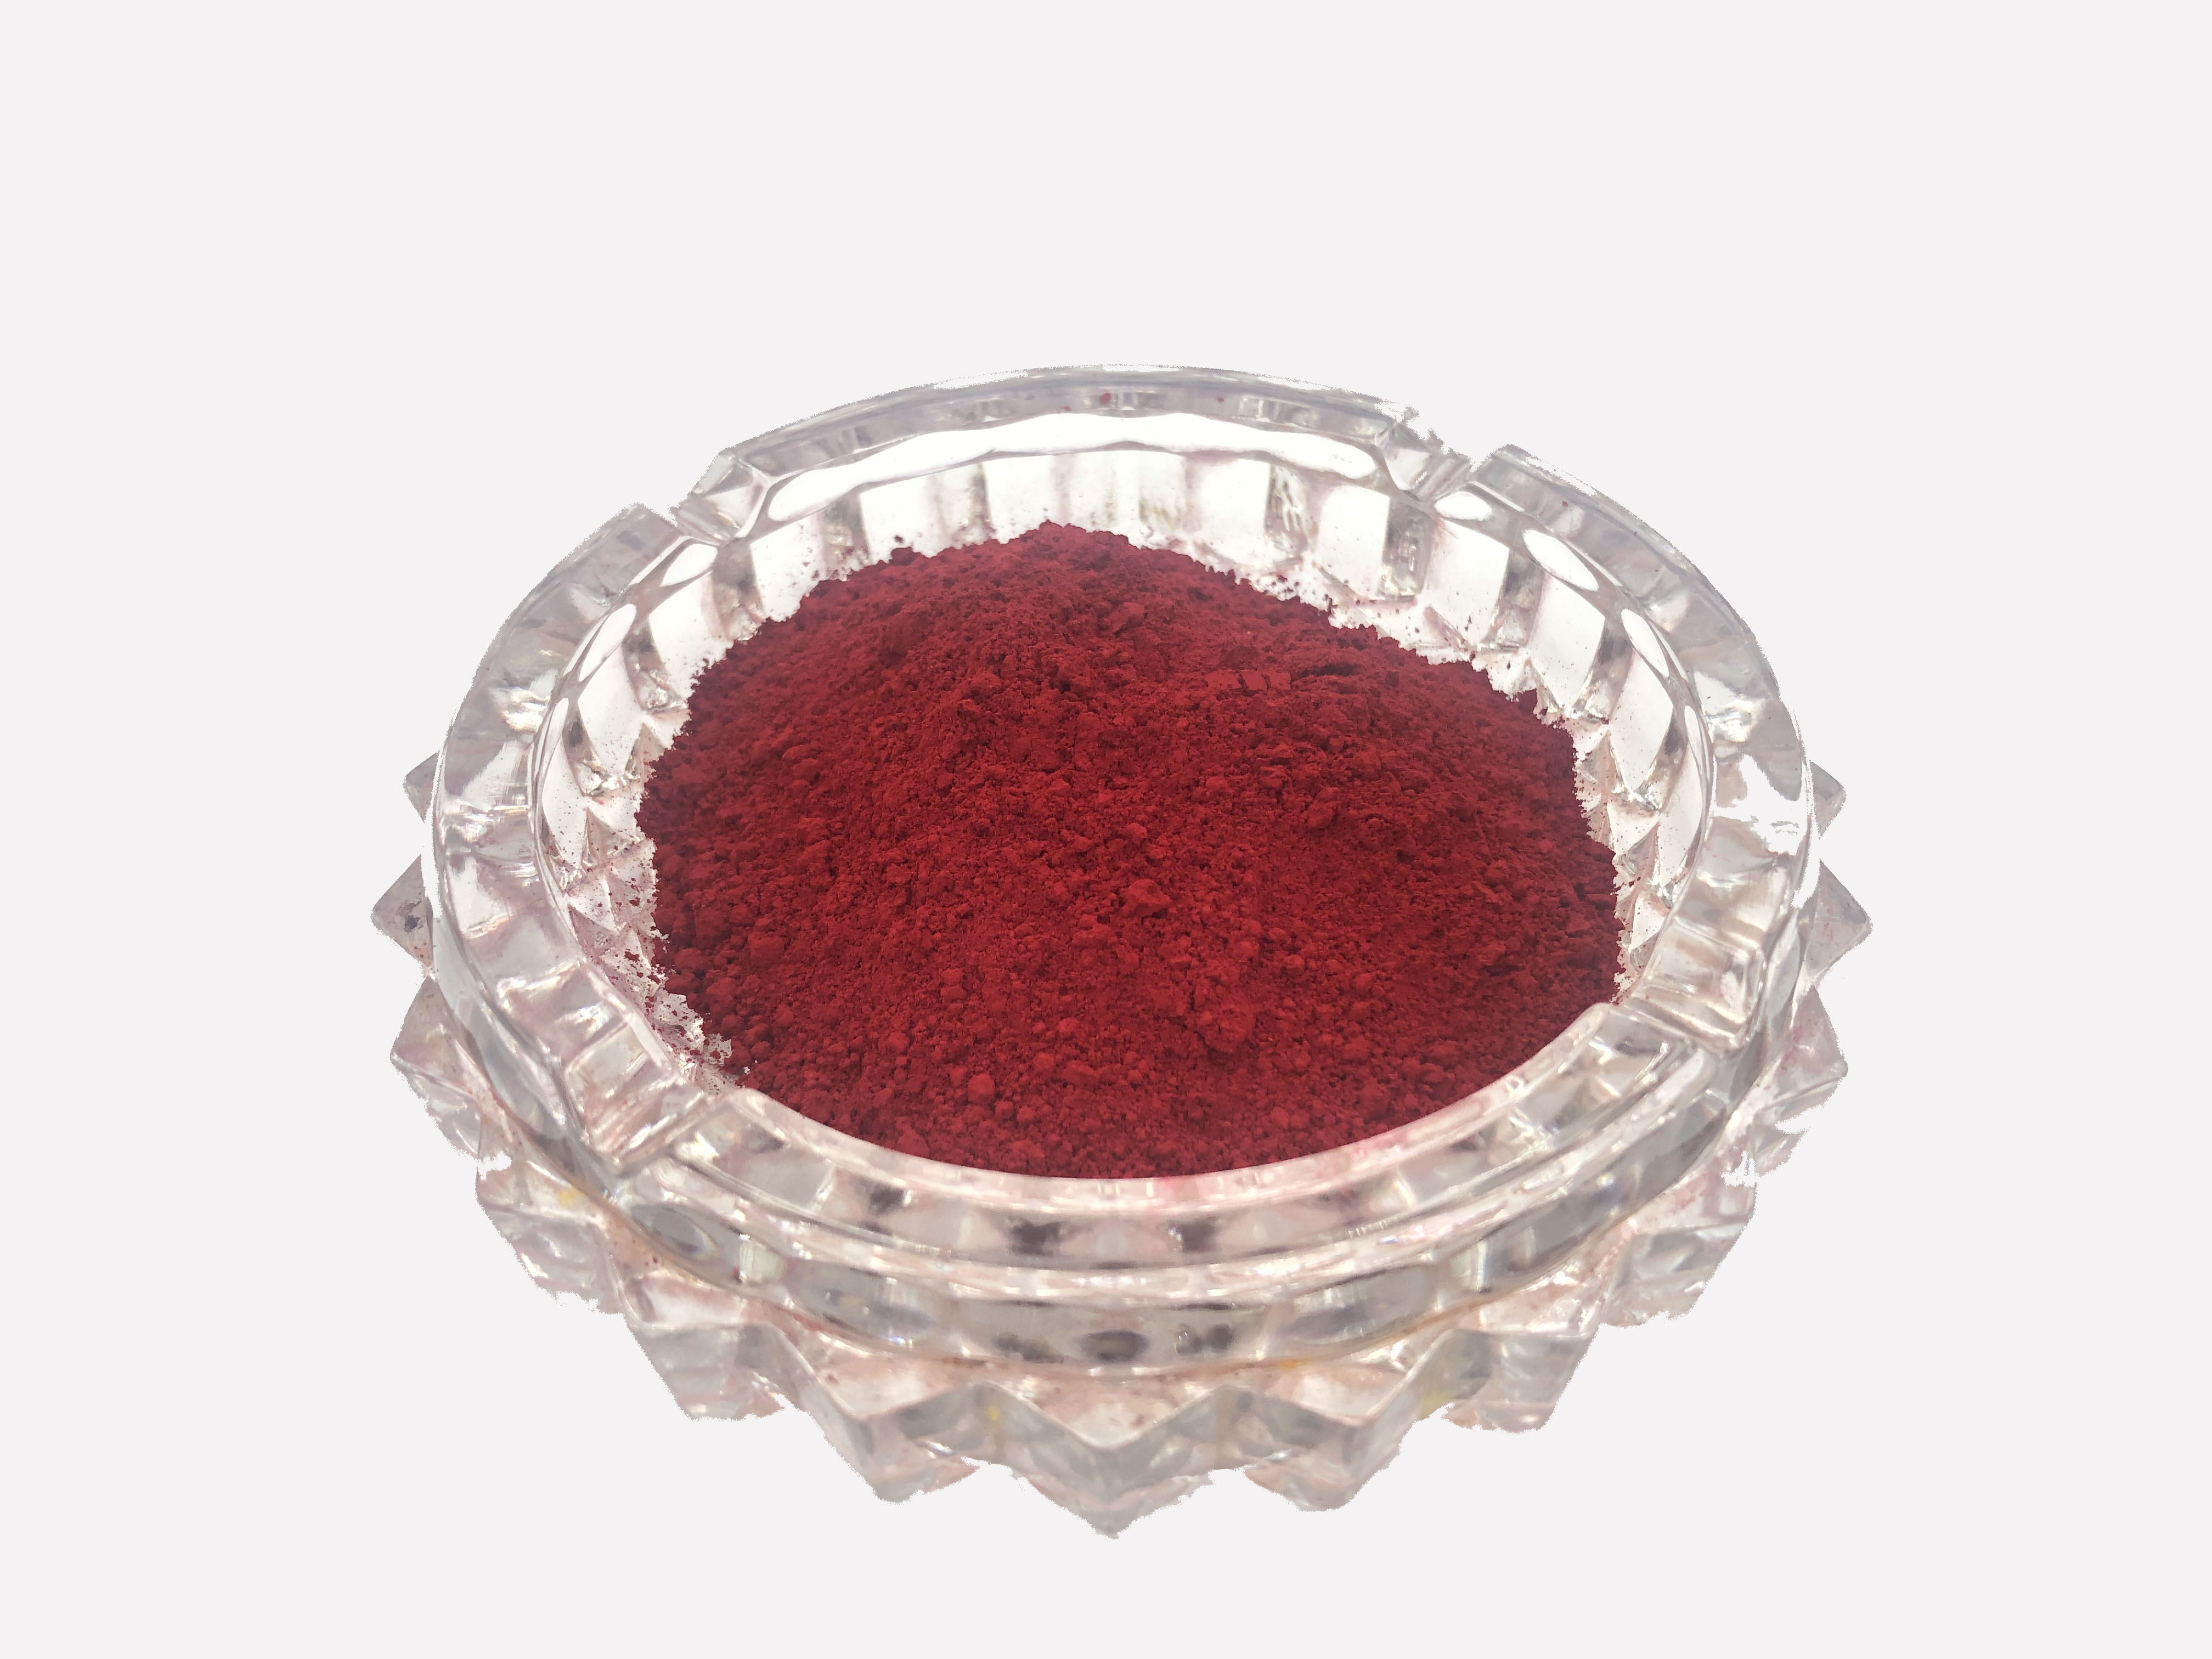 Pigment Red 176 For Plastic Masterbatch Coloring With Fluorescence Performance Advantage 